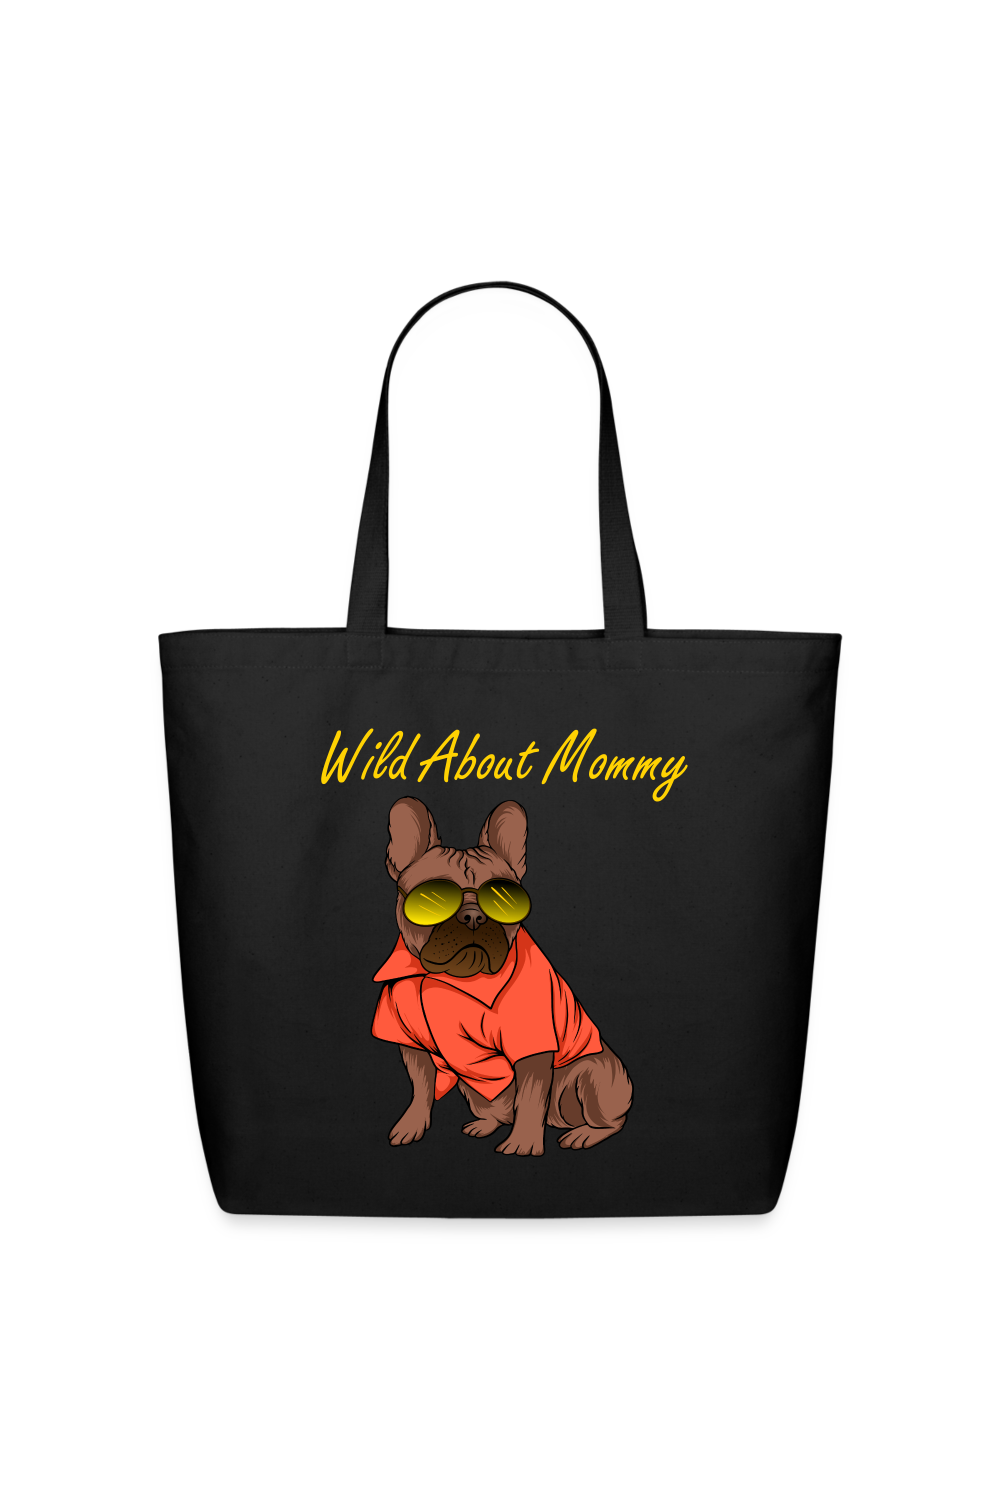 Wild About Mommy Dog with Shades Black Cotton Tote - black - NicholesGifts.online